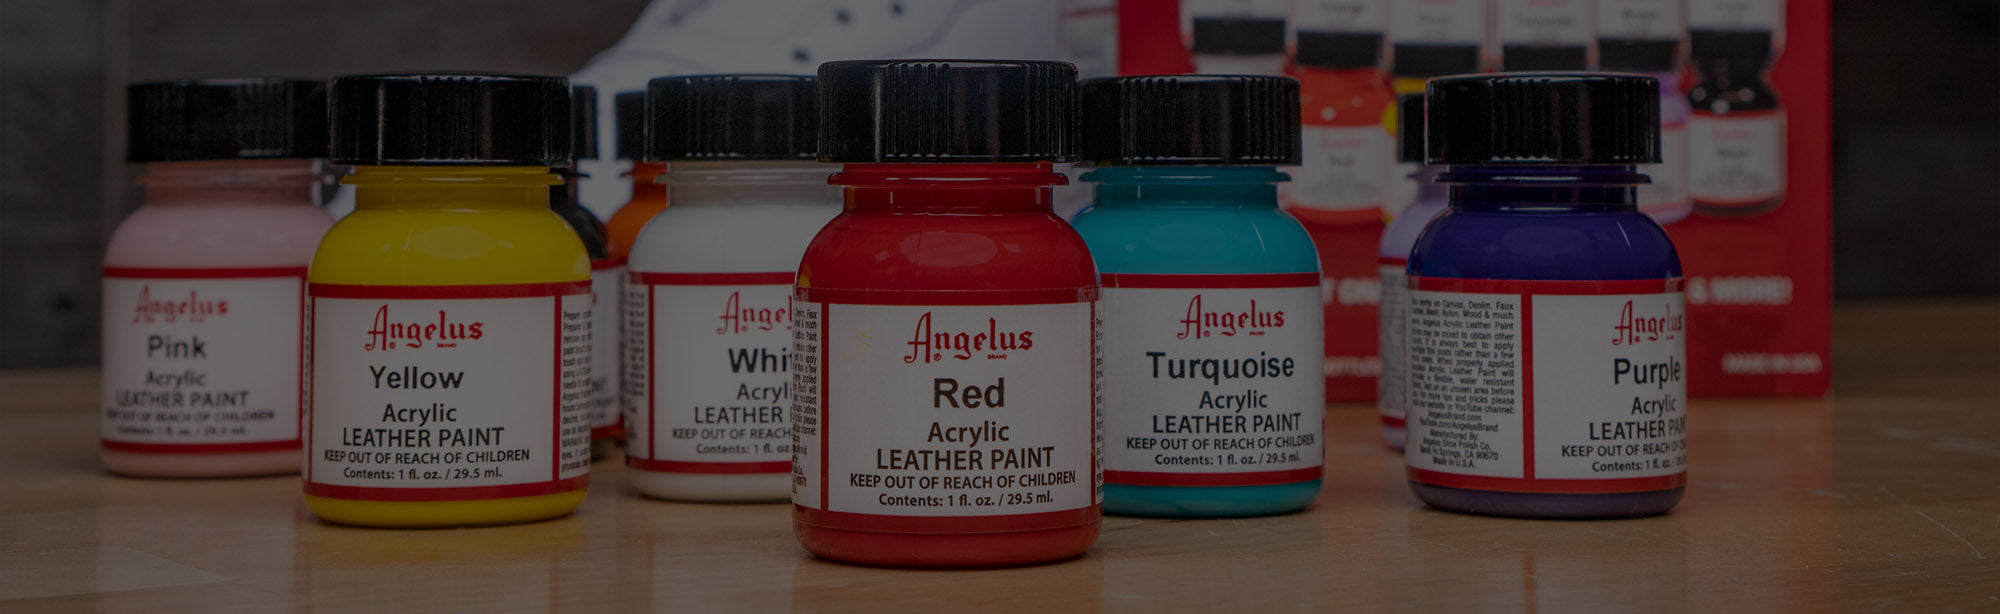 Kits, Angelus Brand Shoe Cleaner, Customize Your Jordans